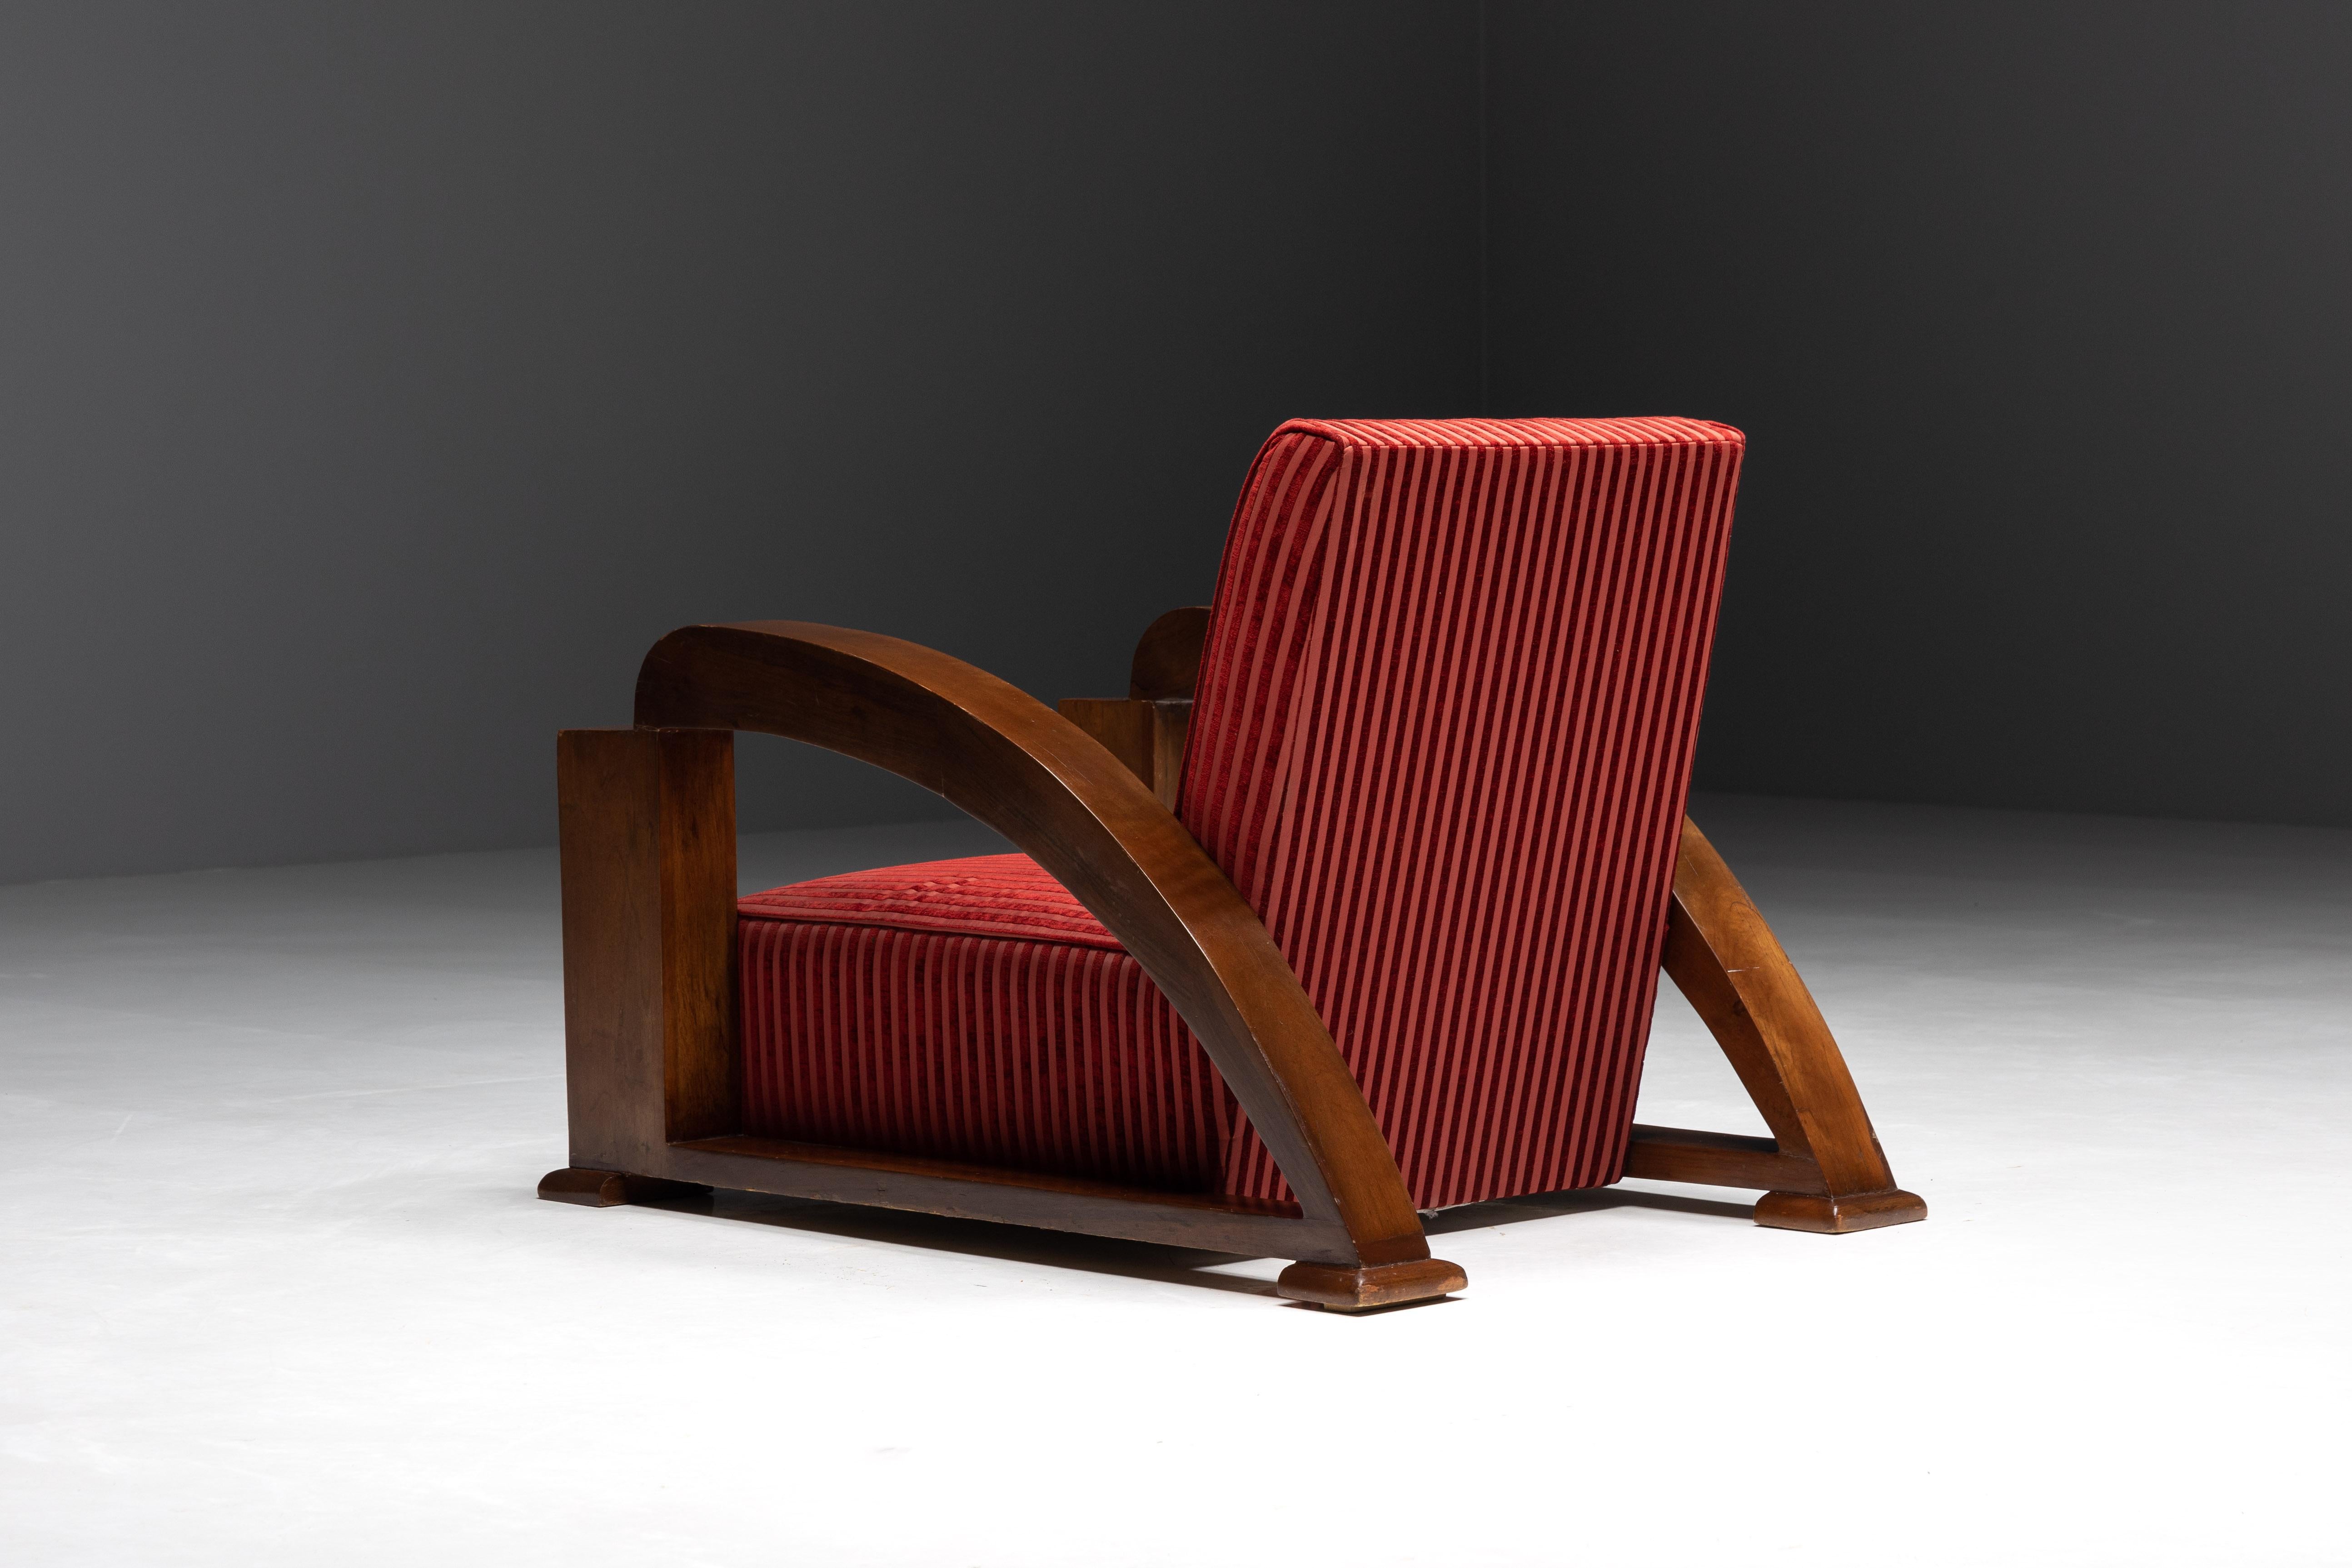 Art Deco Armchairs in Red Striped Velvet and with Swoosh Armrests, France, 1940s For Sale 7